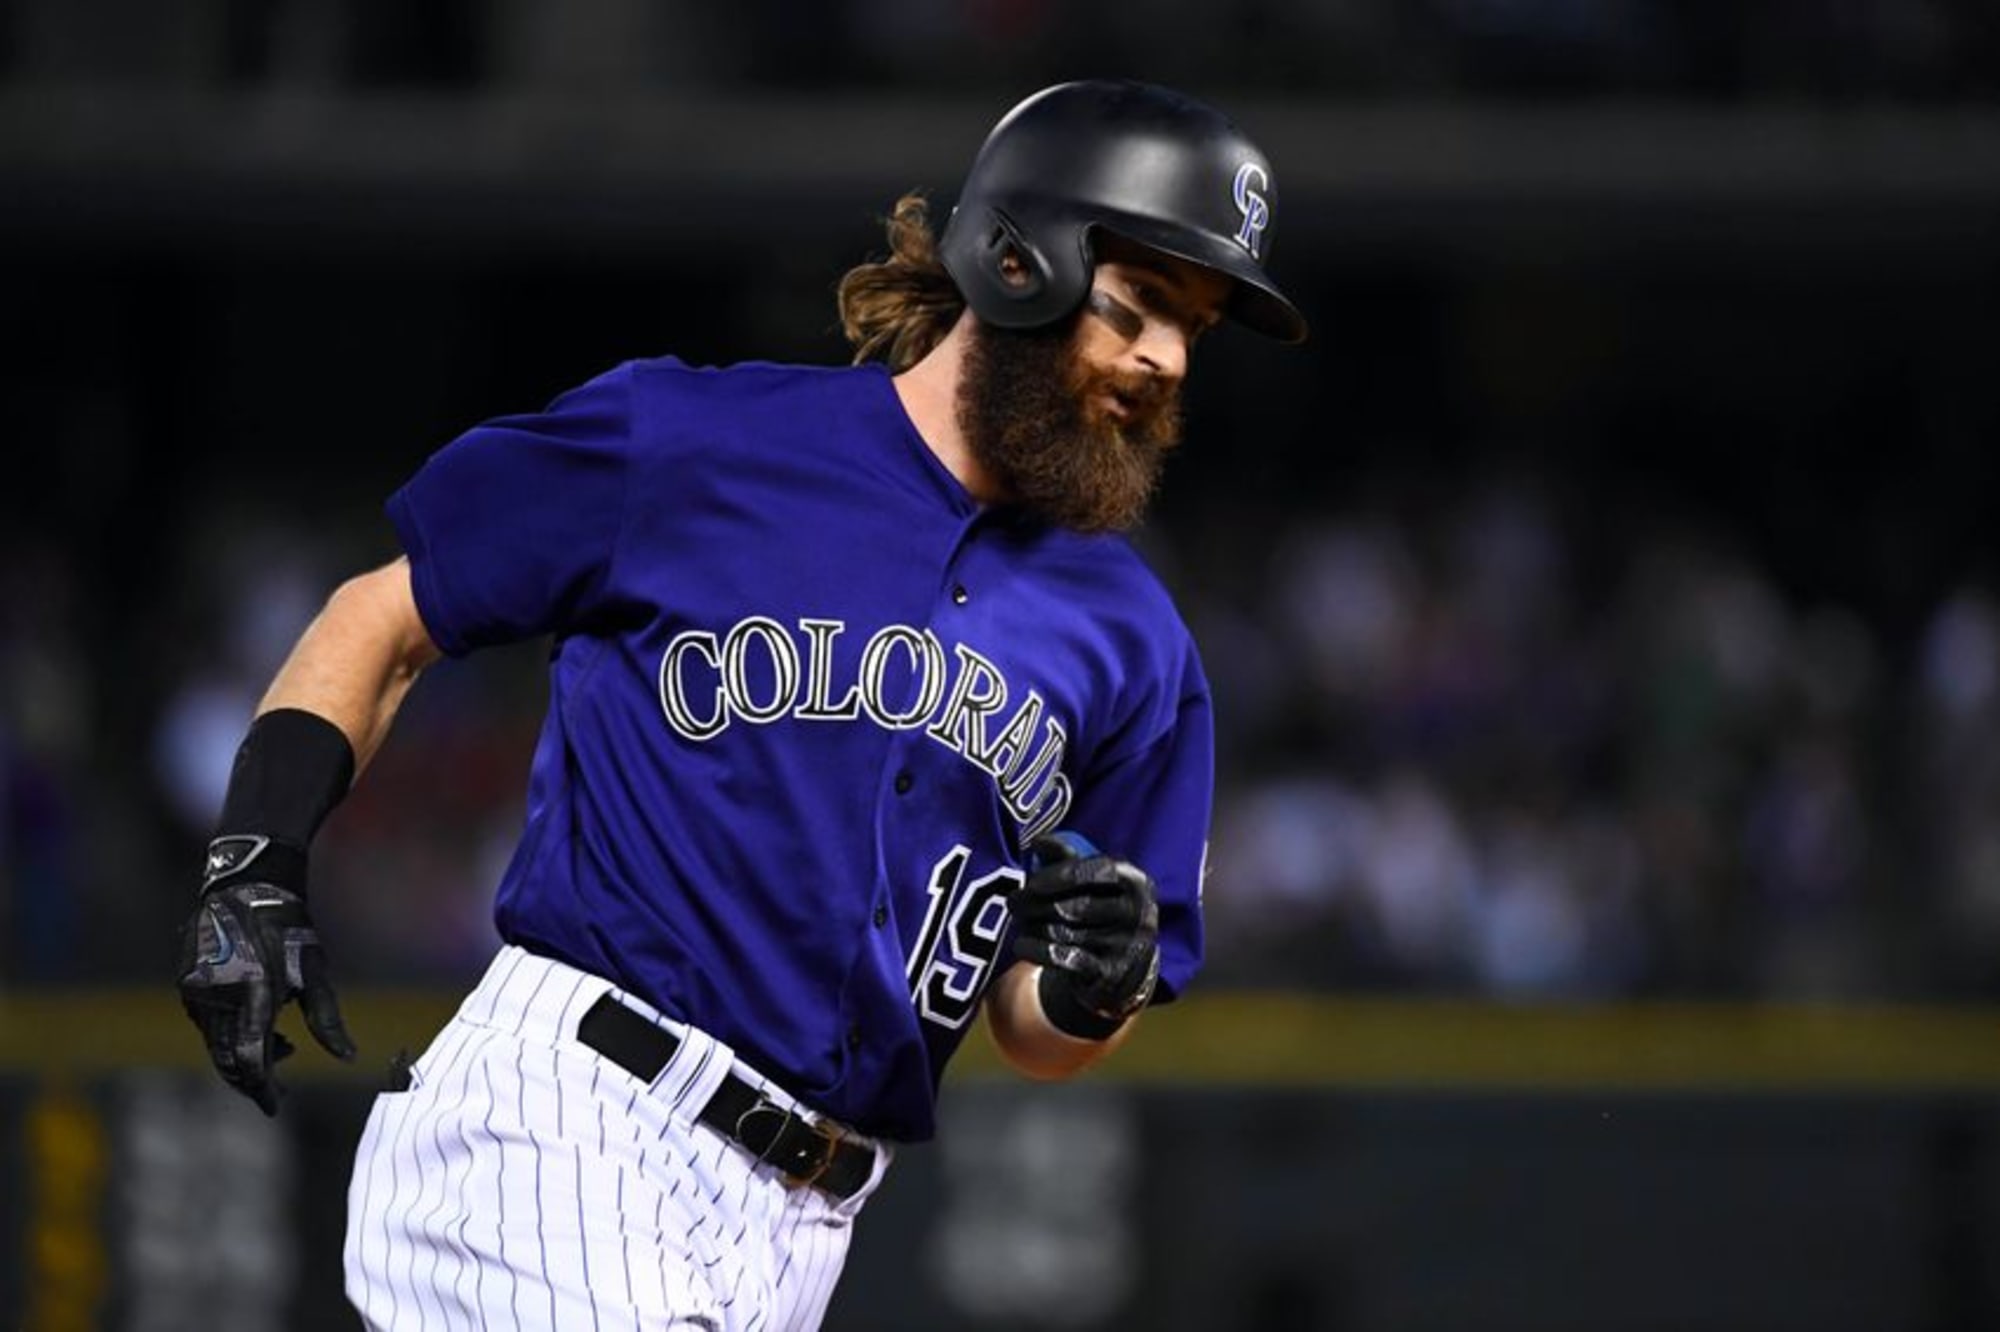 Ranking the Rockies: No. 5 Charlie Blackmon became a better